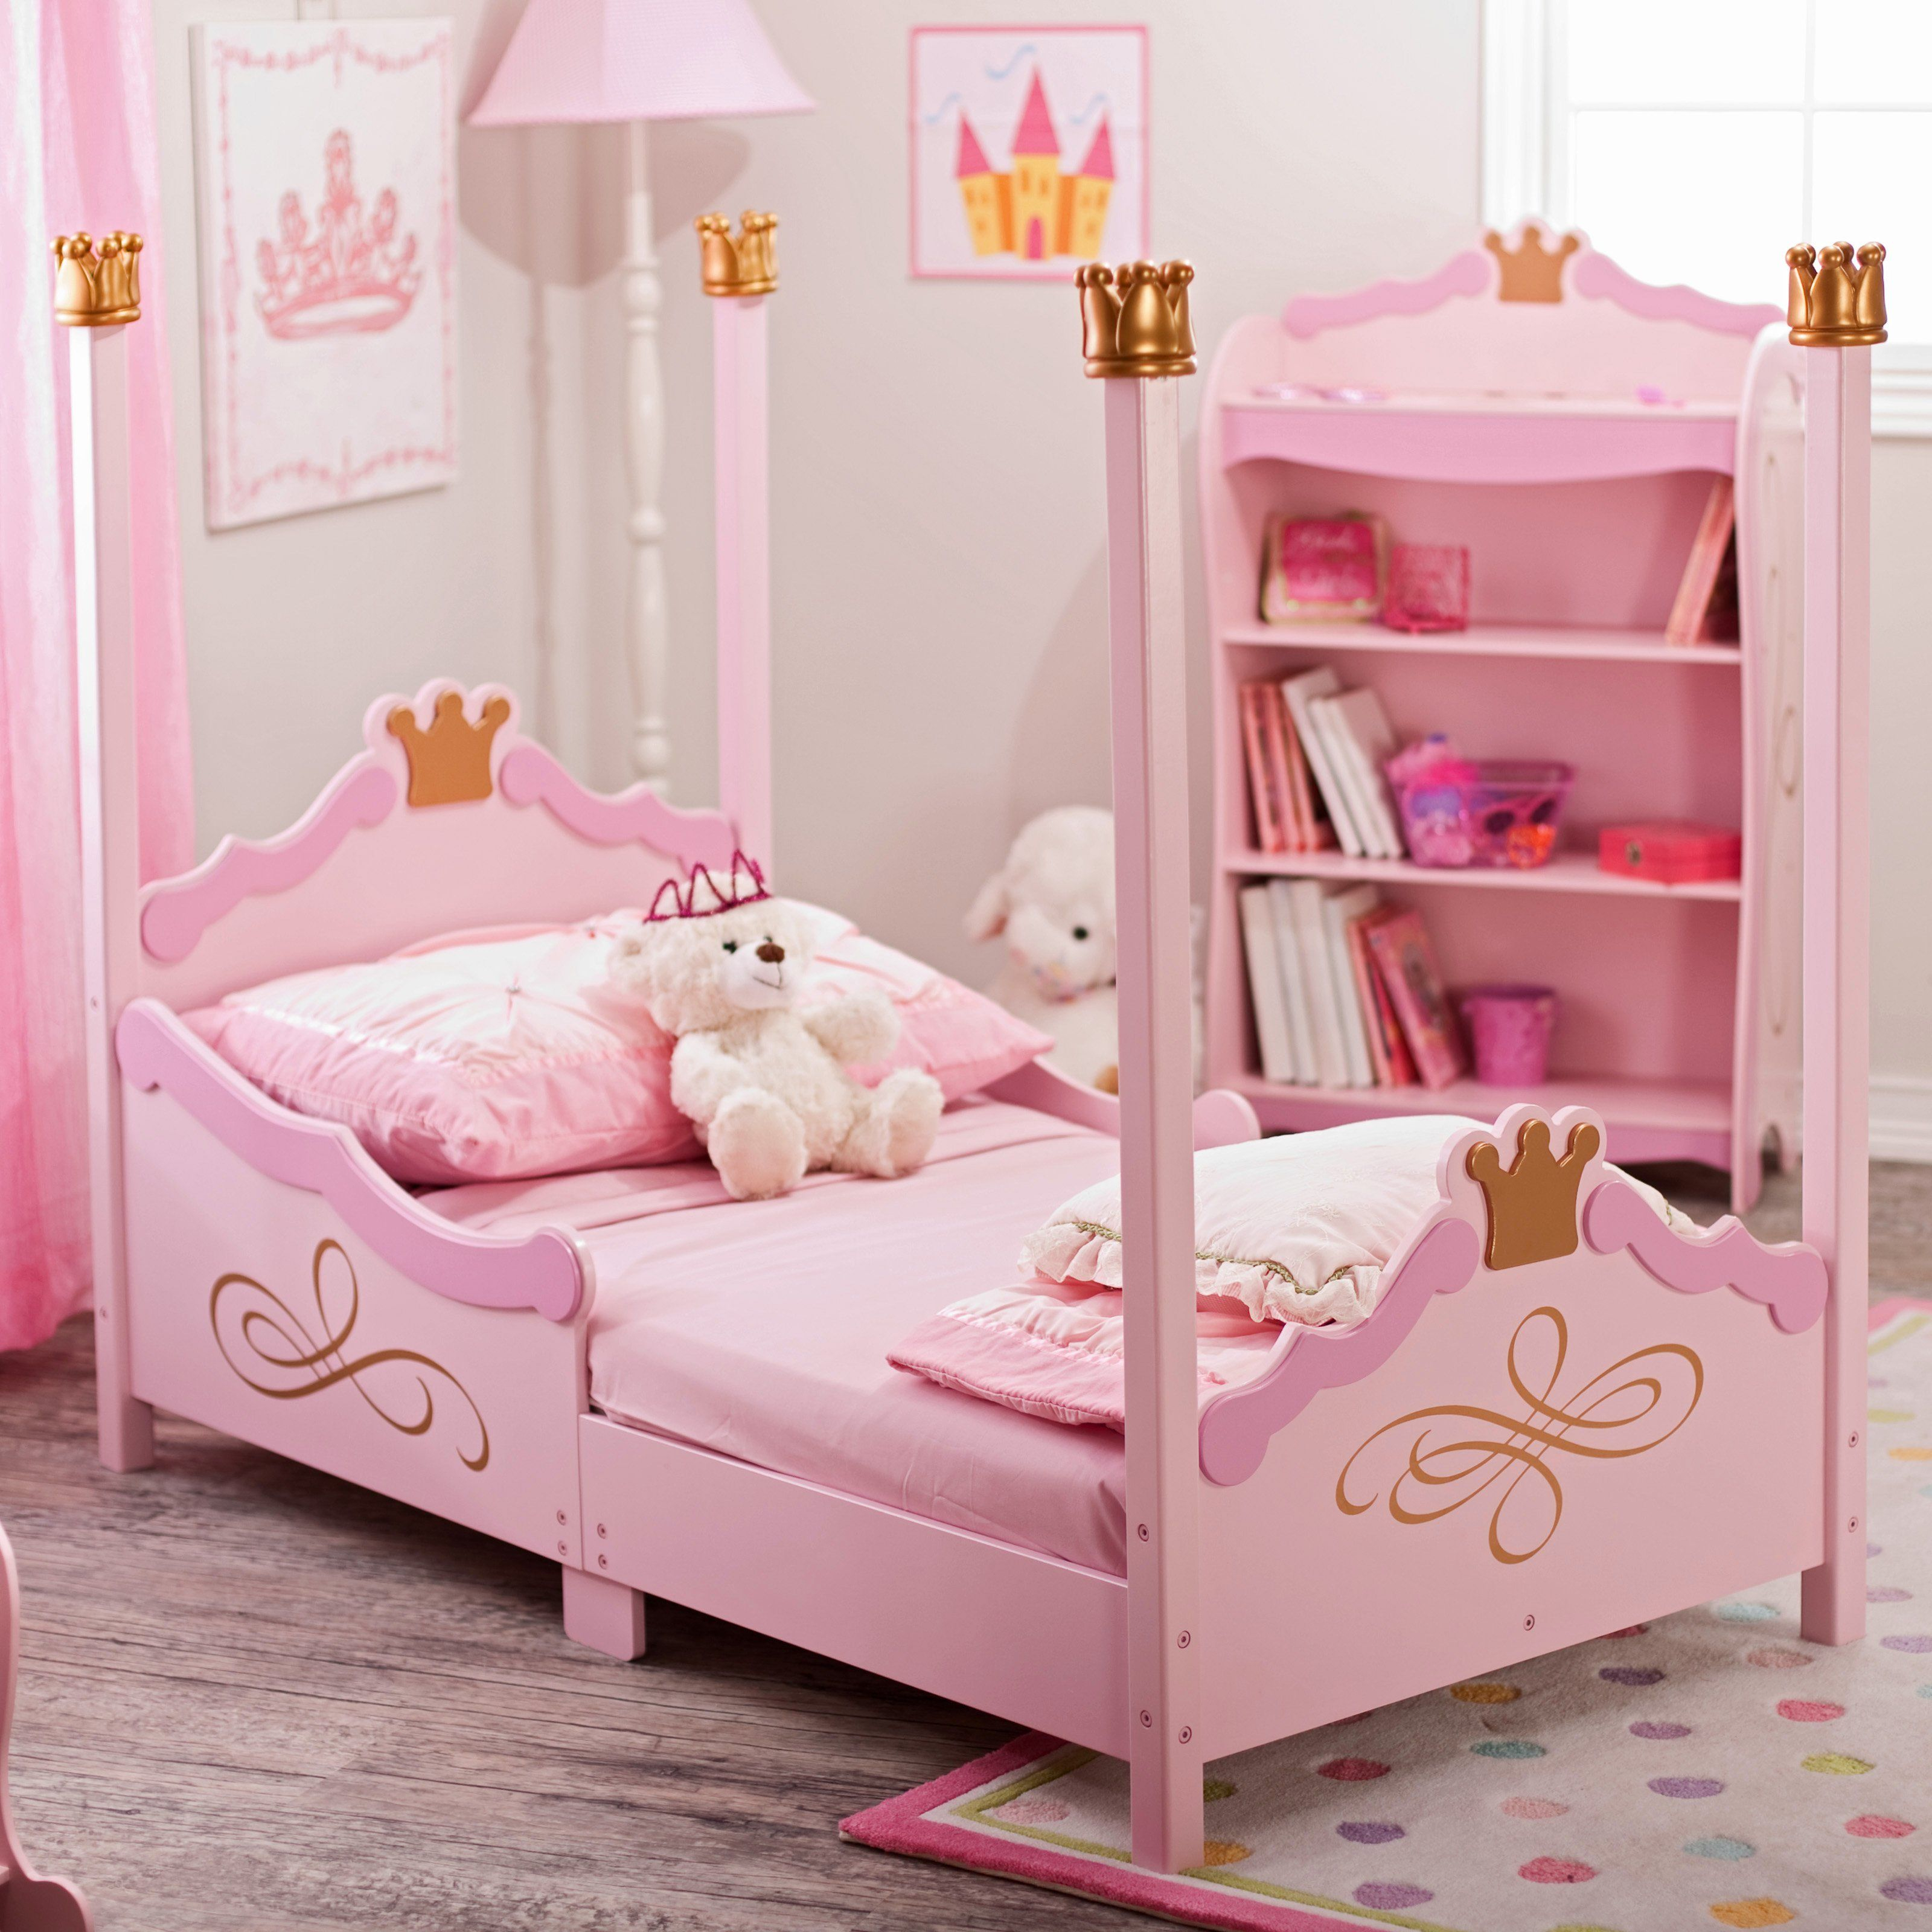 Have To Have It Kidkraft Princess Toddler Bed Pink 12201 pertaining to size 3200 X 3200